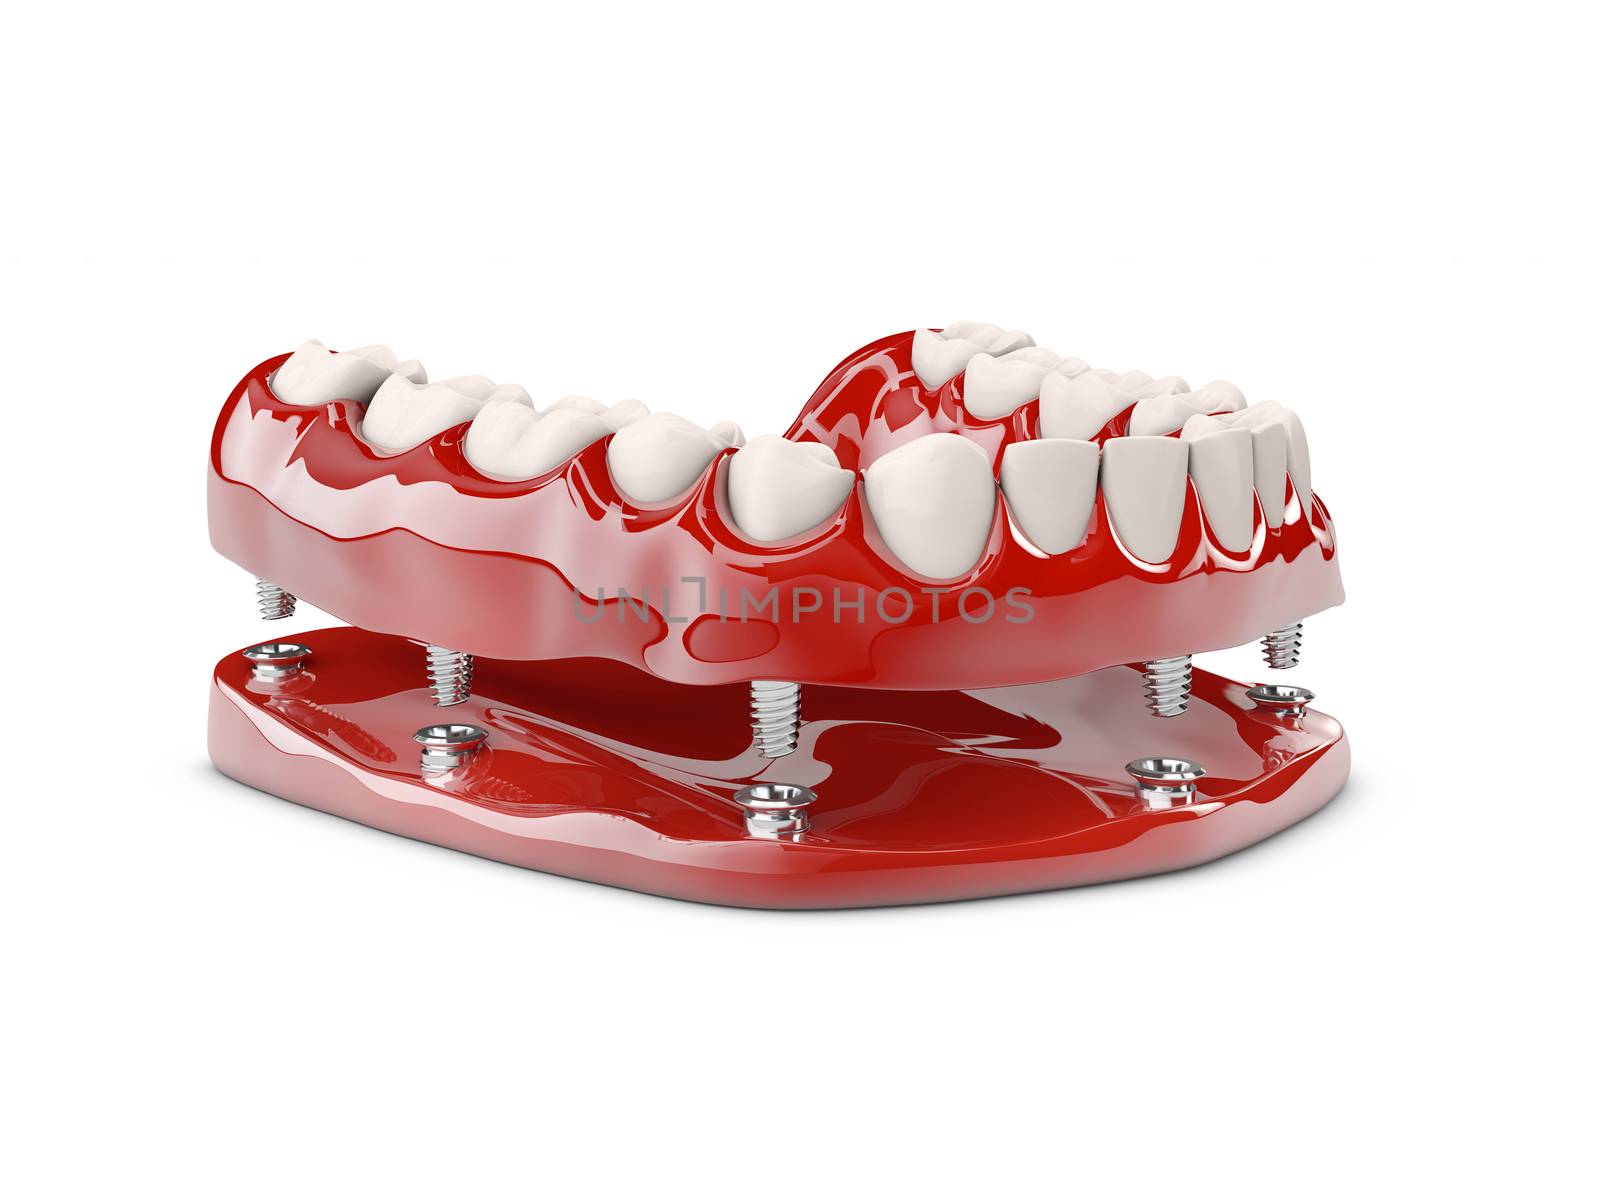 Human teeth and Dental implant. 3d illustration by tussik